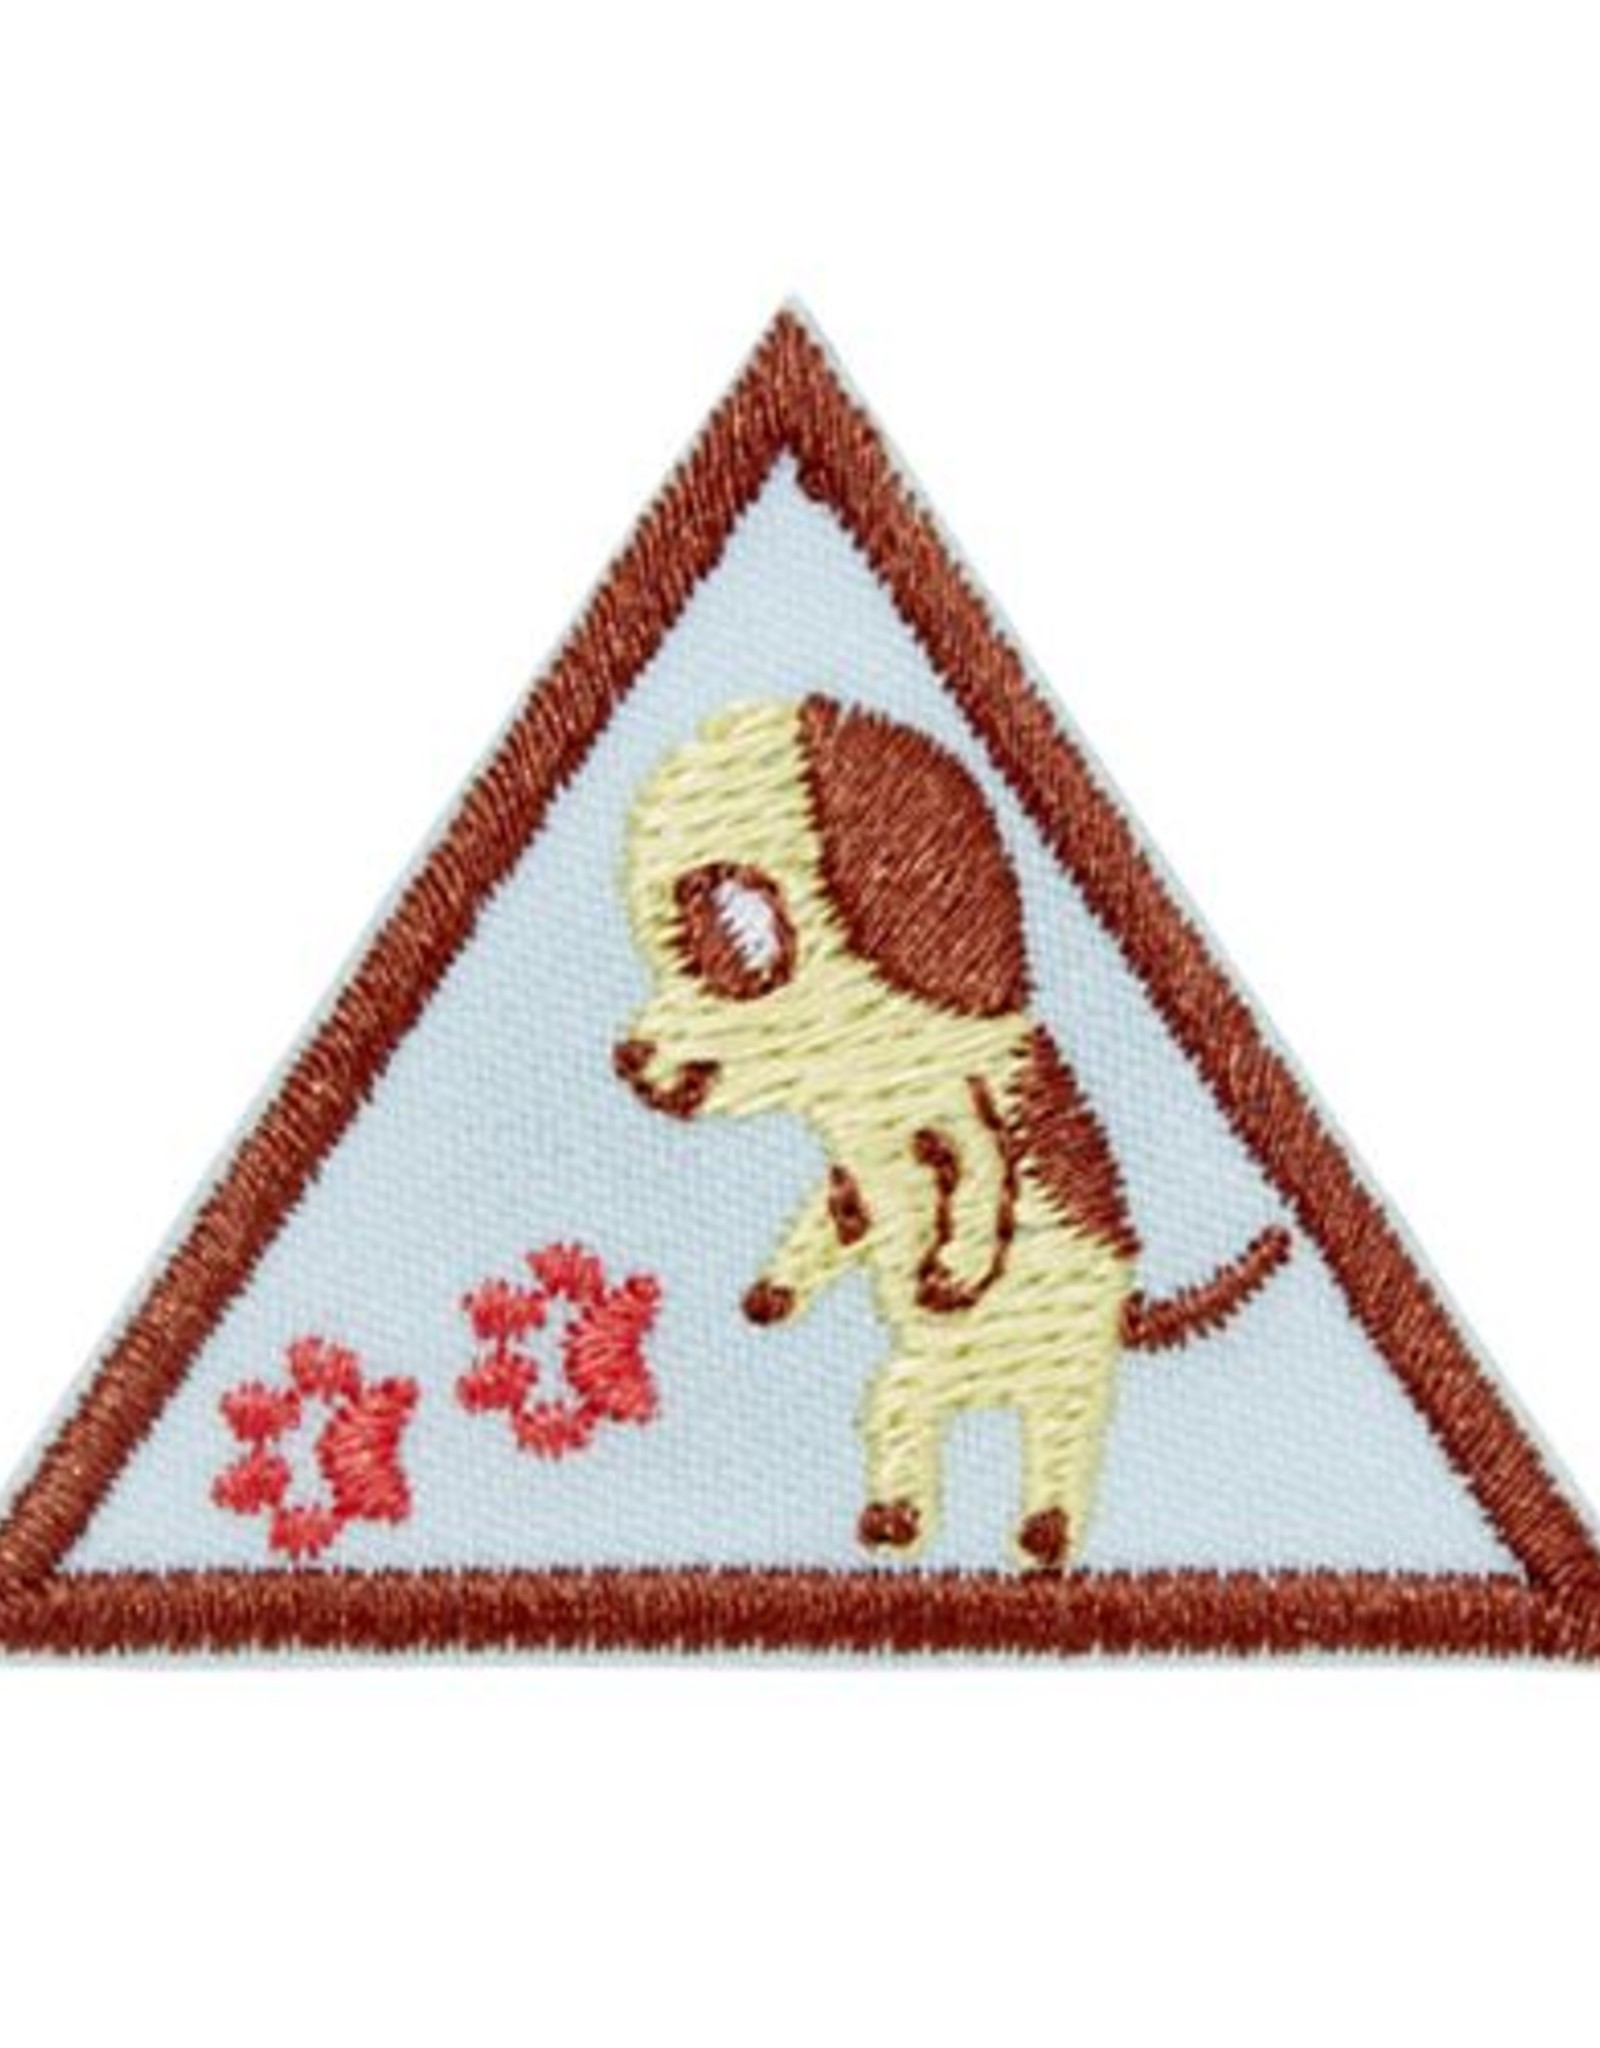 GIRL SCOUTS OF THE USA Brownie Cybersecurity 3: Investigator Badge